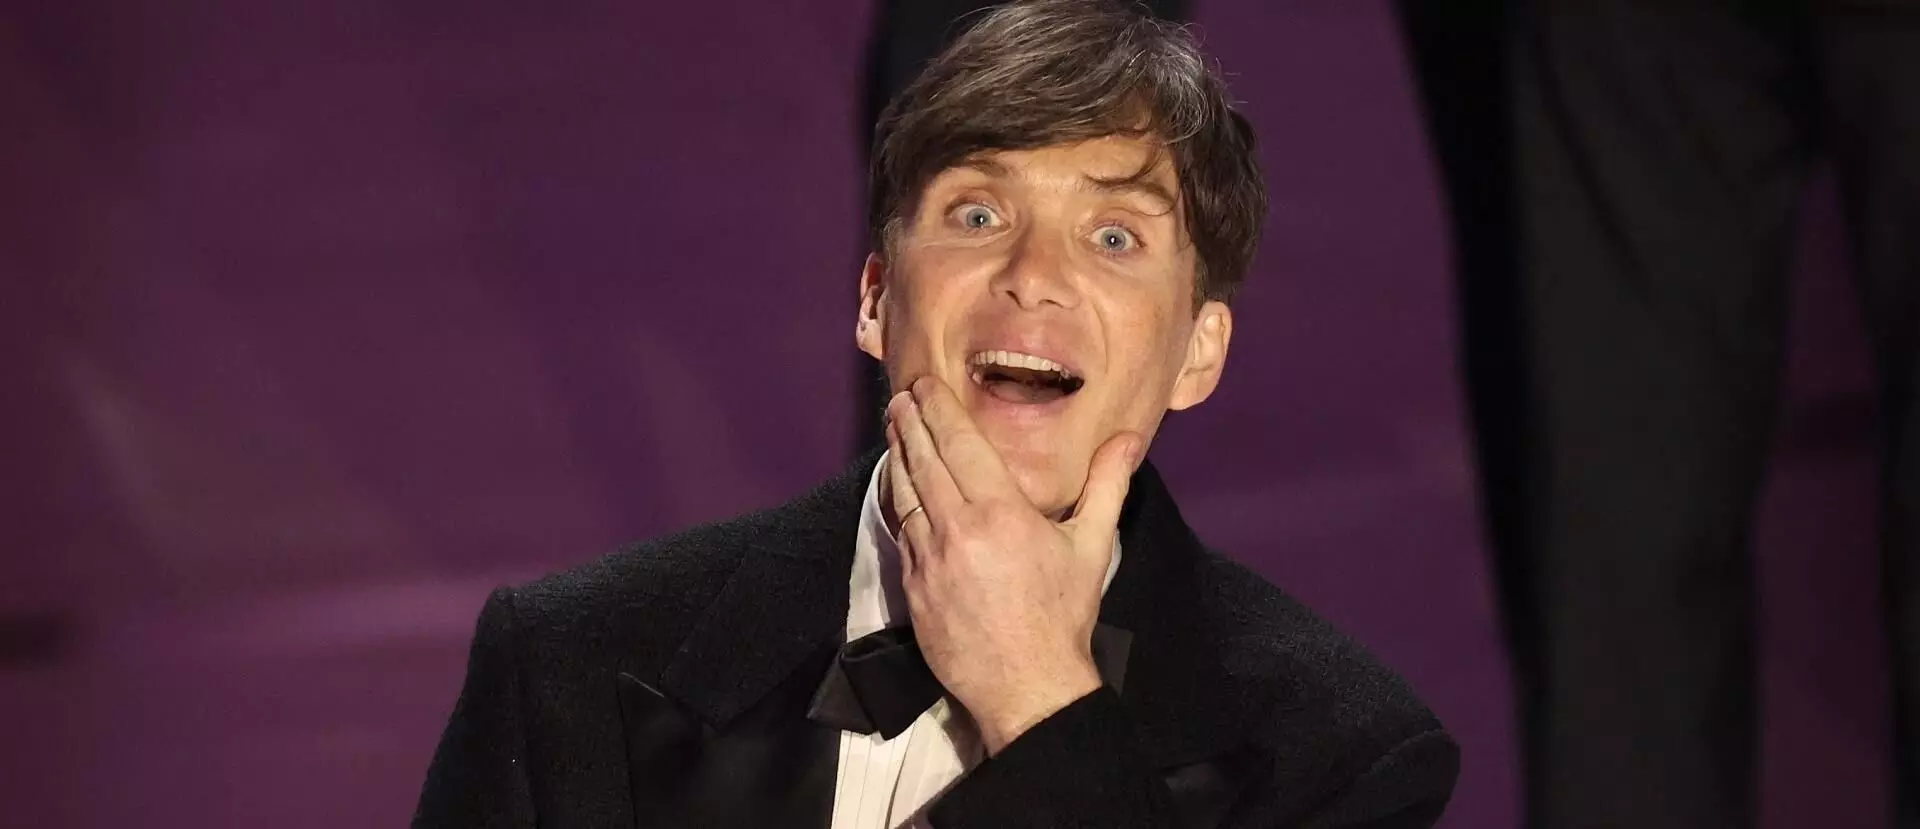 Universal Studios Blood Runs Coal to have Cillian Murphy in lead role